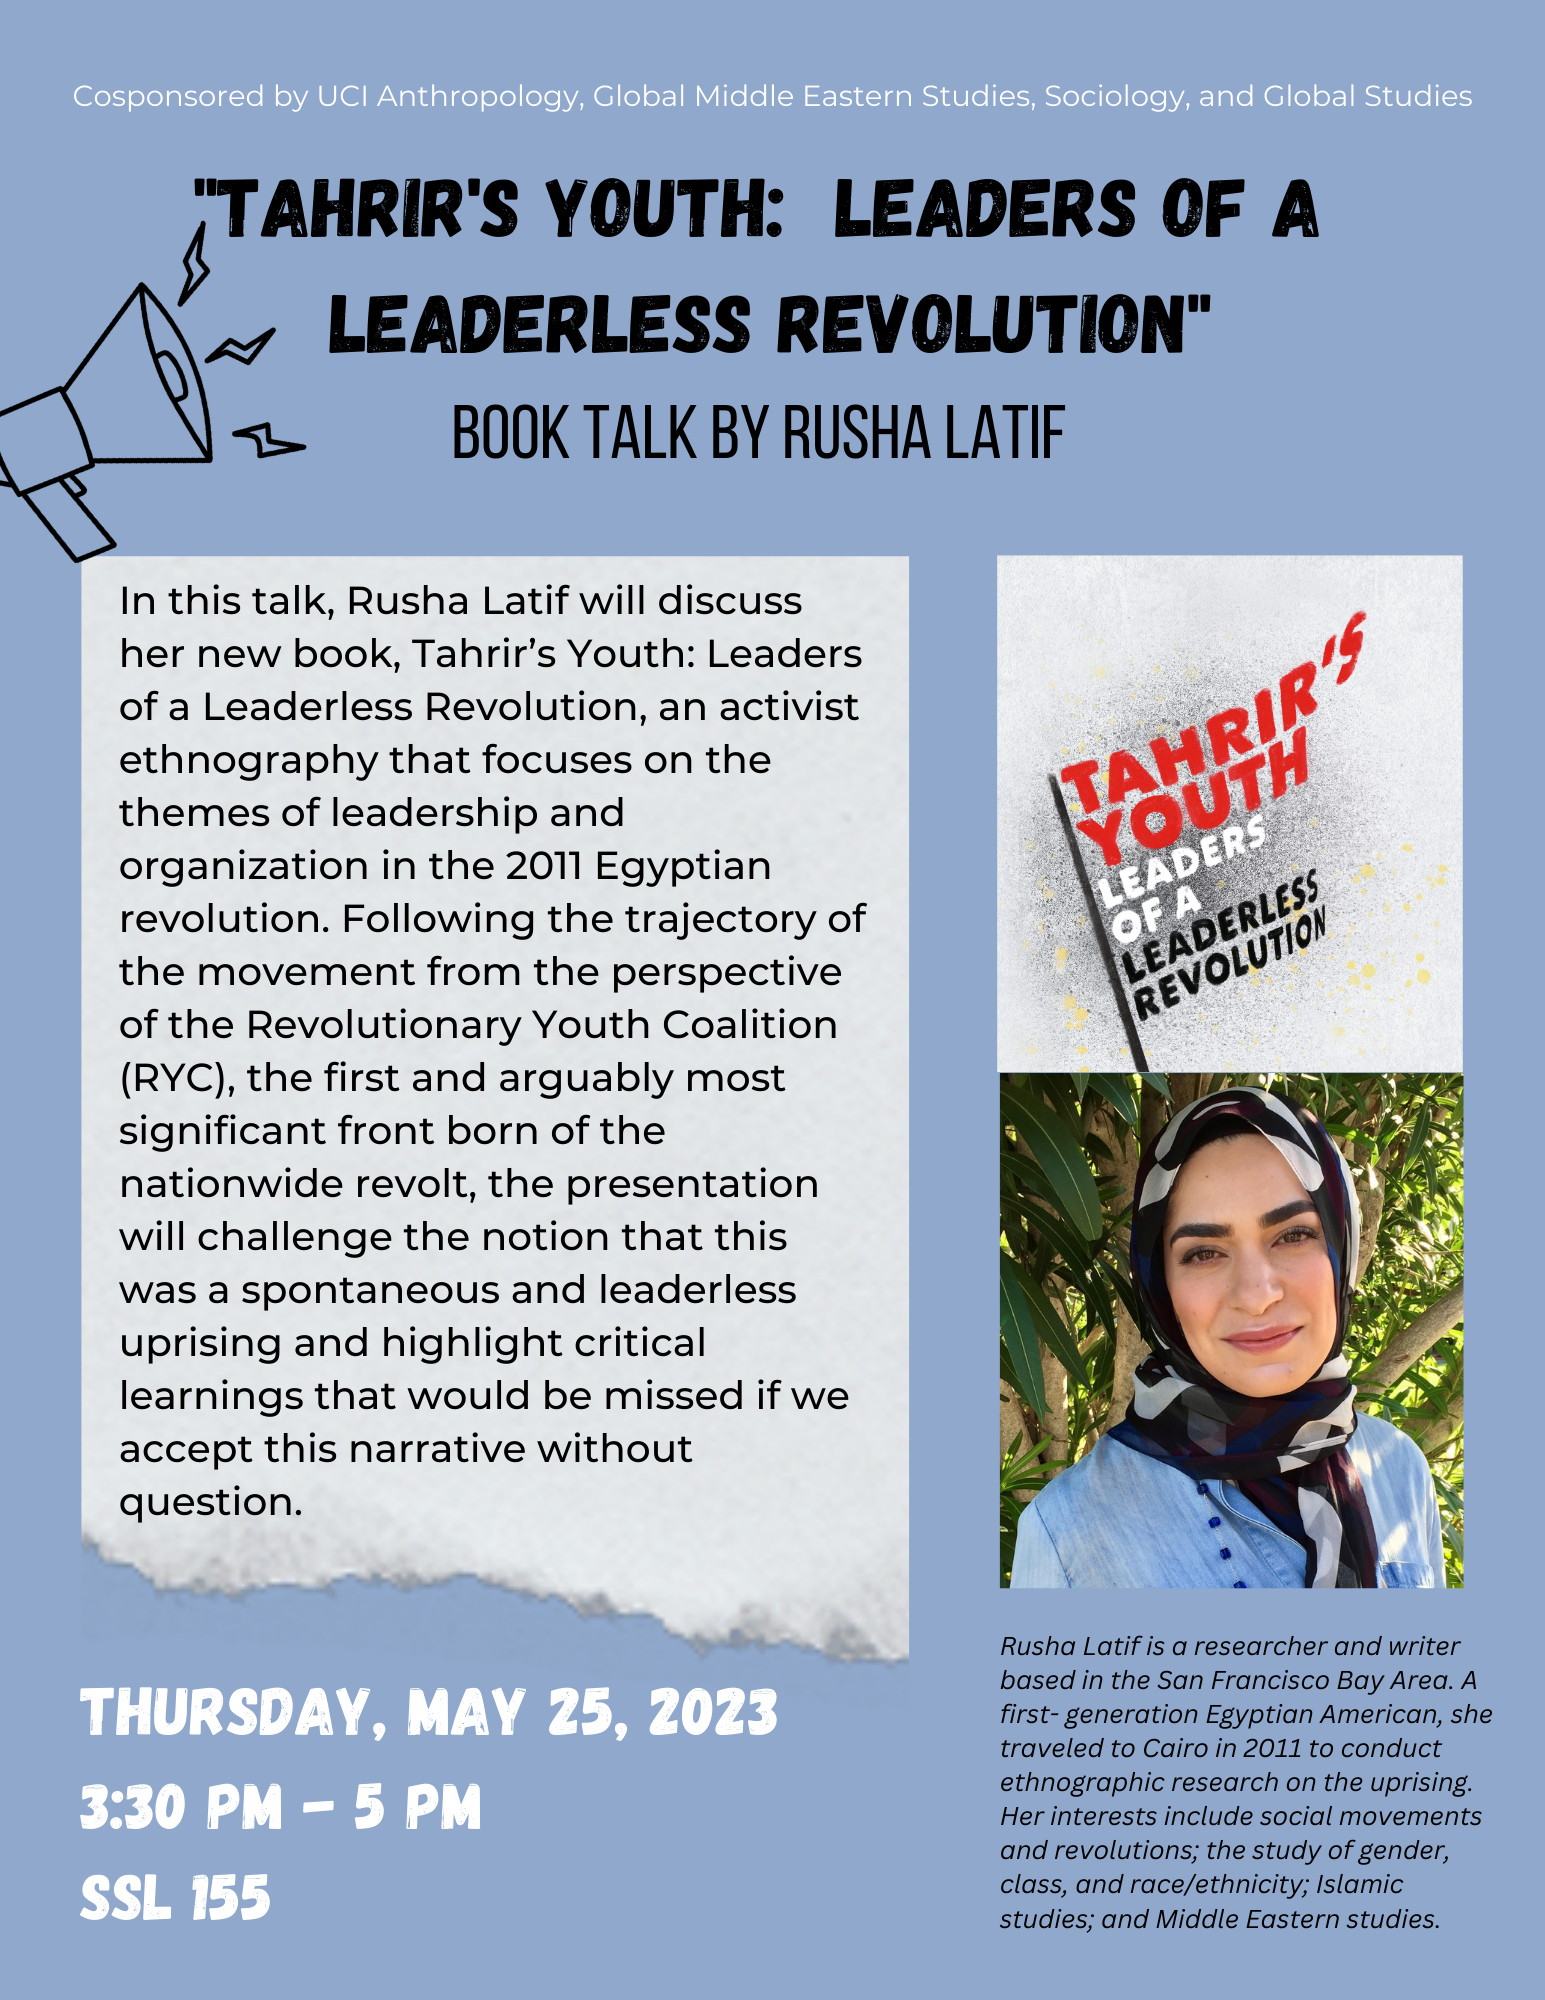 Tahrir's Youth, book talk by Rusha Latif on May 25 from 3:30pm to 5pm in SSL 155